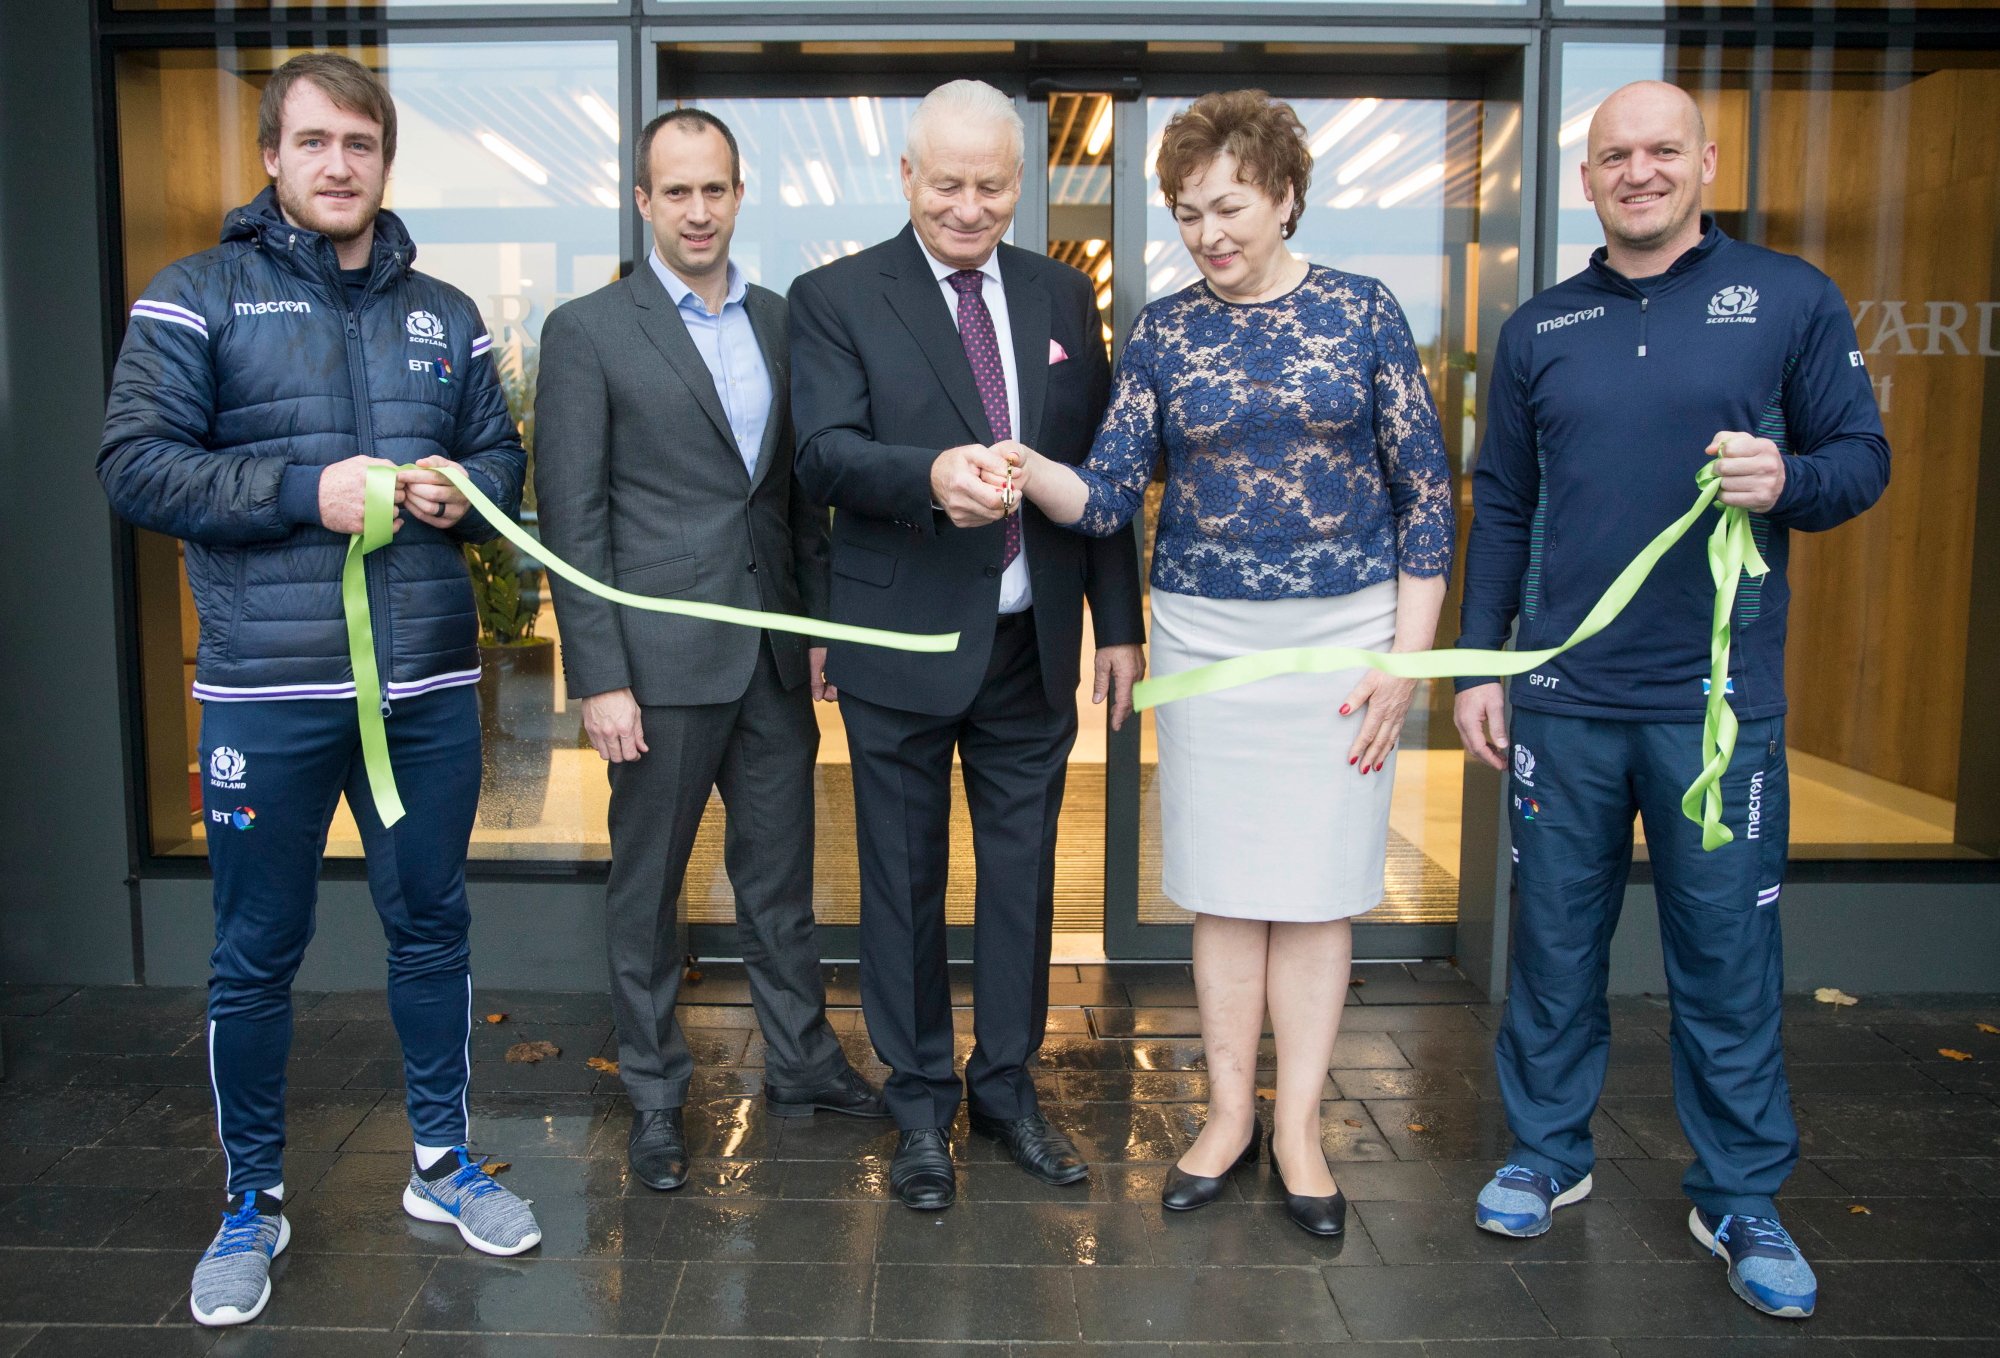 Scotland national rugby union squad Head Coach, Gregor Townsend and man of the moment Stuart Hogg helped Will Macpherson, manager of Courtyard by Marriott Edinburgh West, at the official opening of the hotel with owners Eugeniusz Slominski and his wife Gabriela. Click to enlarge.